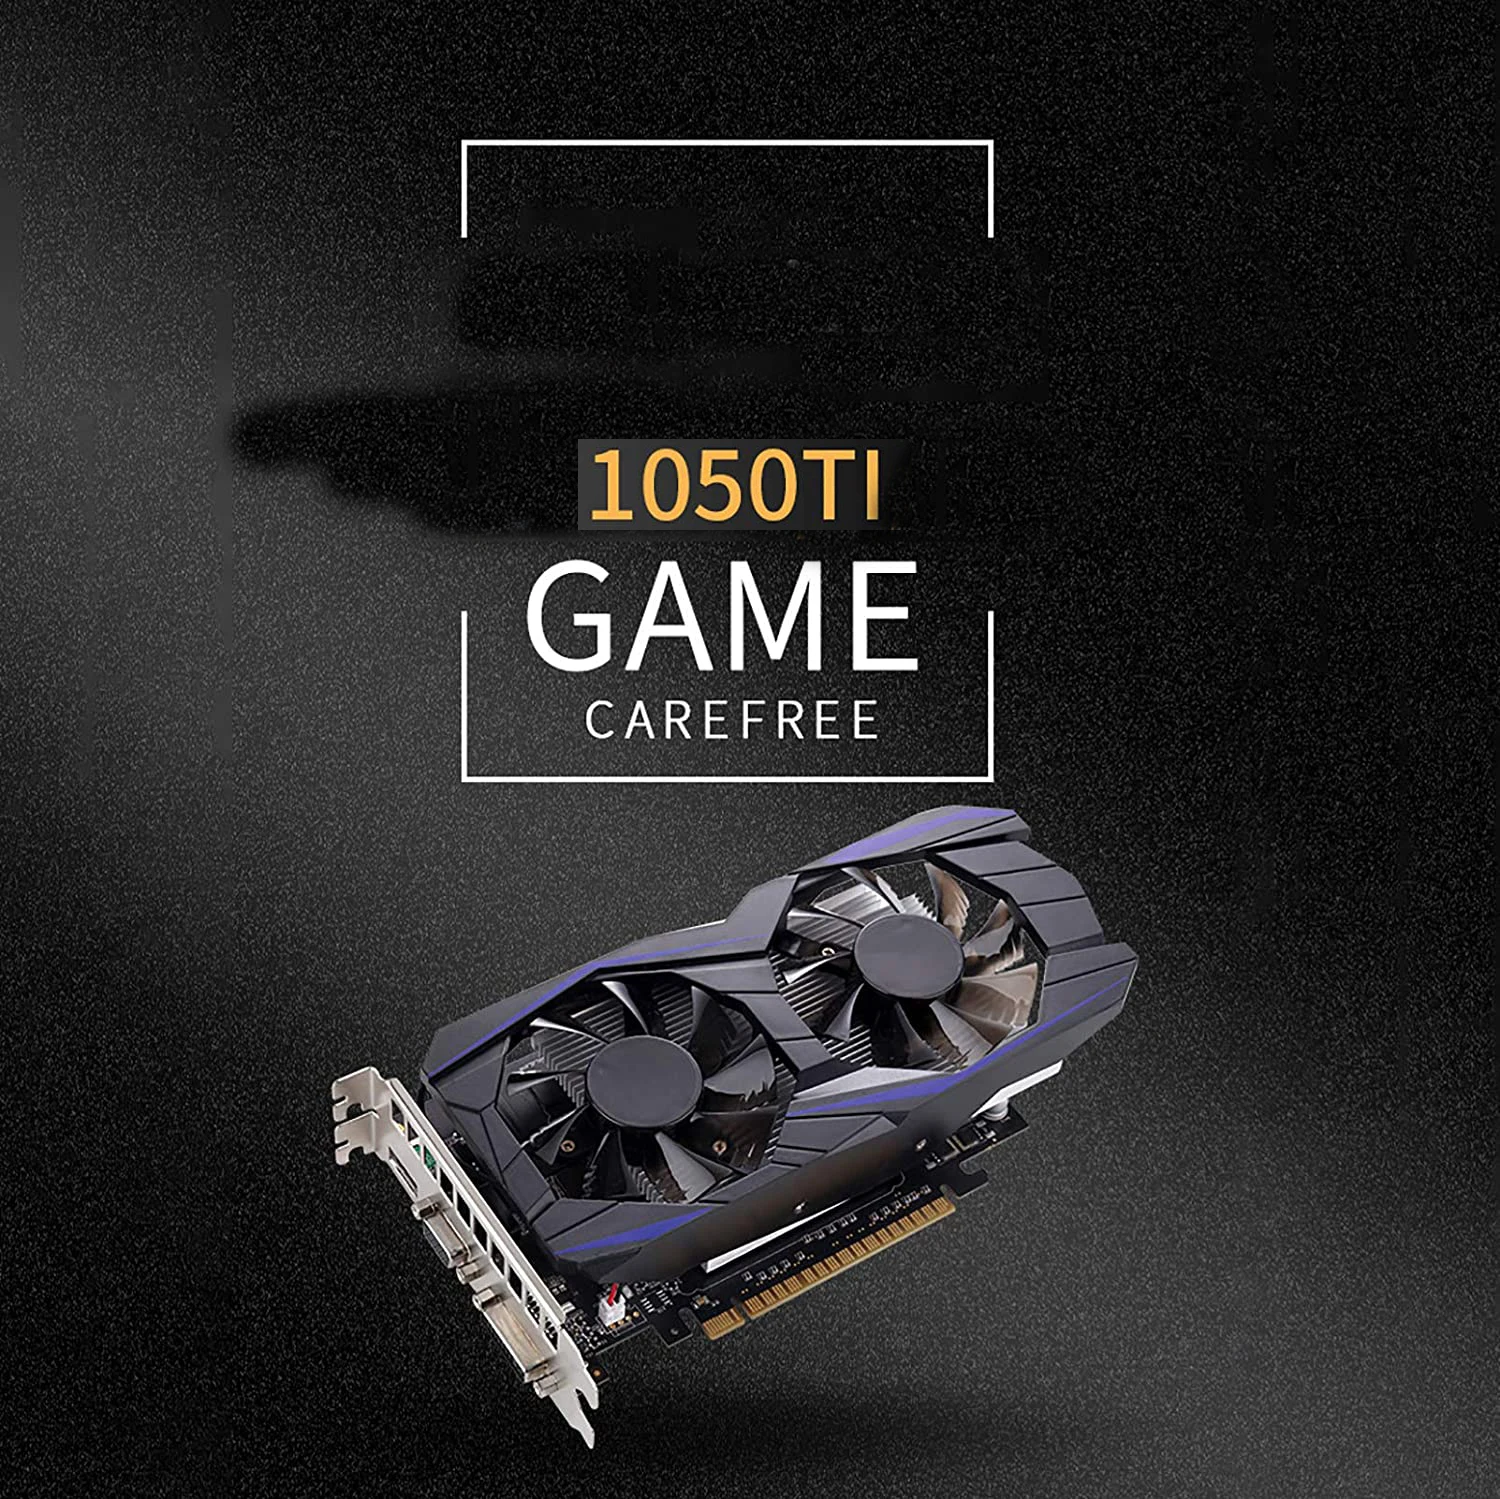 gtx1050ti mining graphics card with fan smart temperature control gddr5 hd 128 bit for desktop pc game entertainment free global shipping